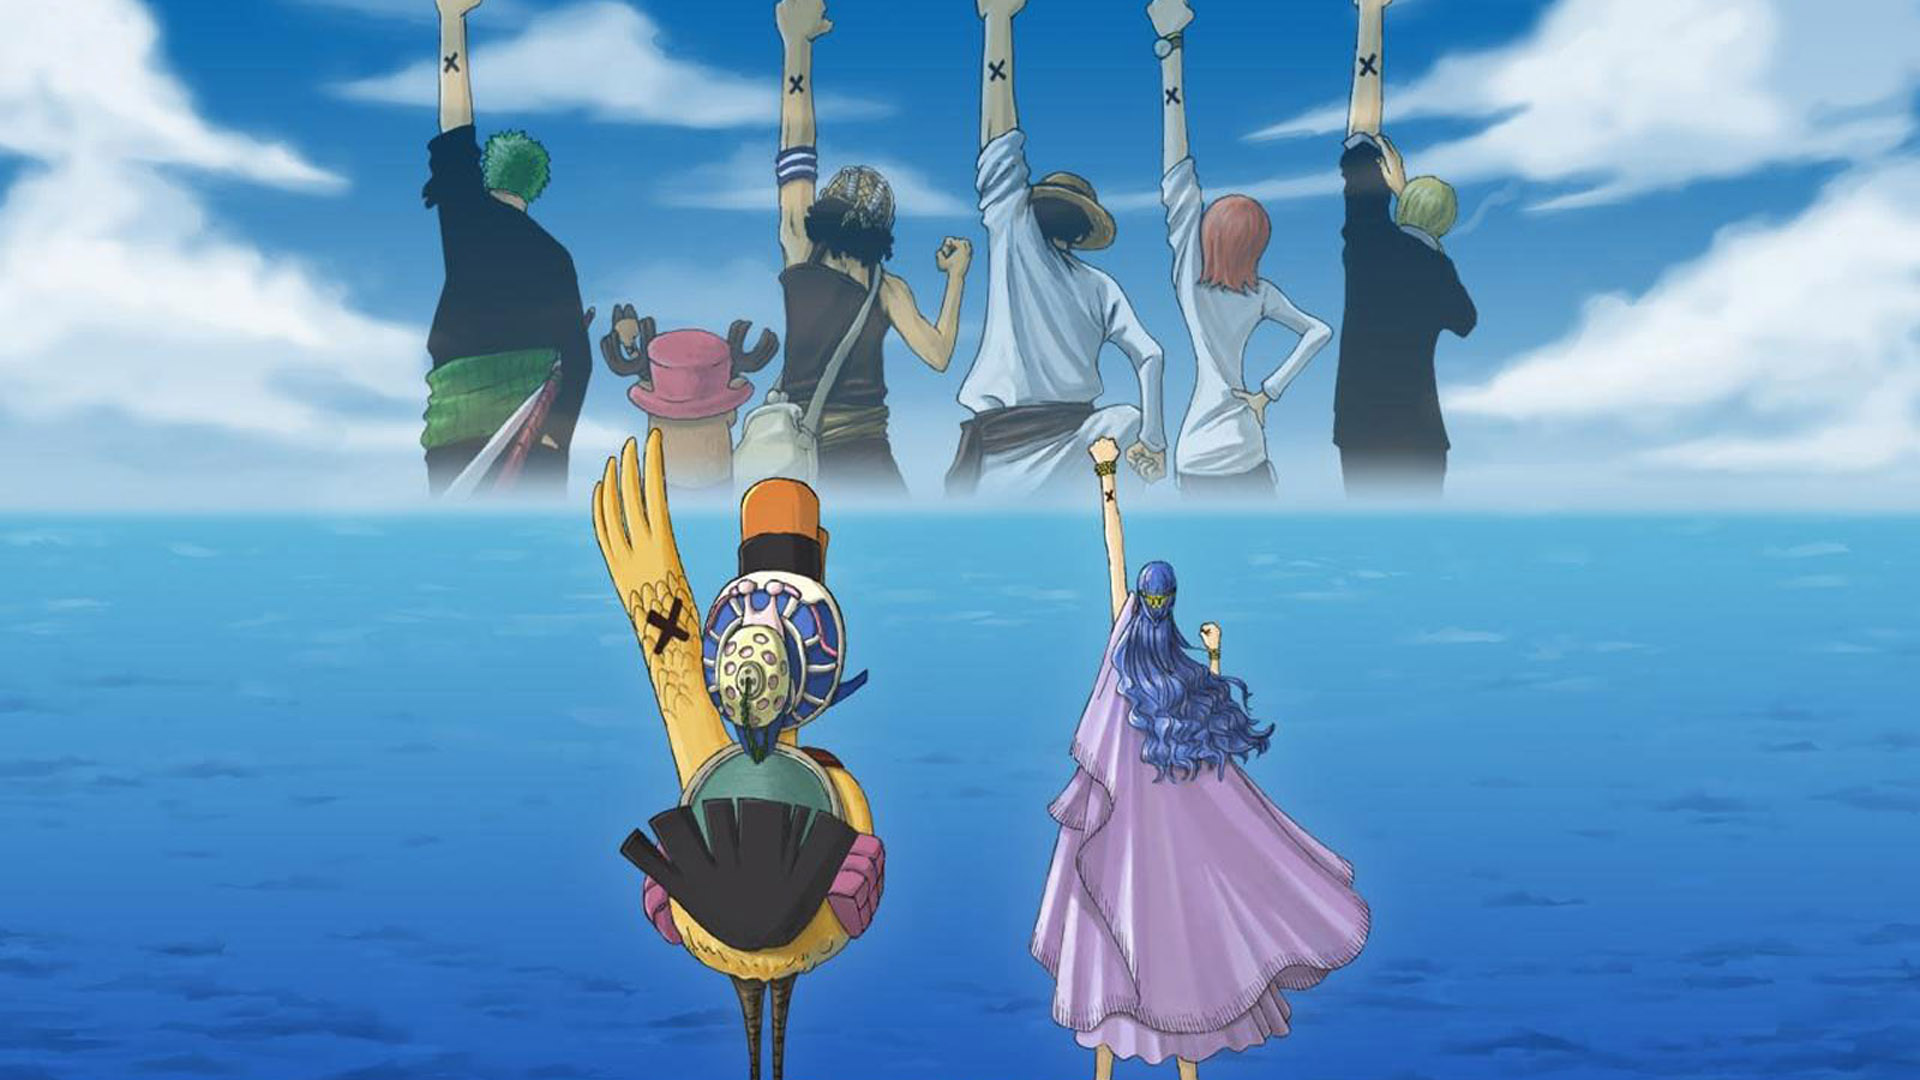 One Piece Friendship 1920x1080 Wallpapers 1920x1080 Wallpapers 1920x1080